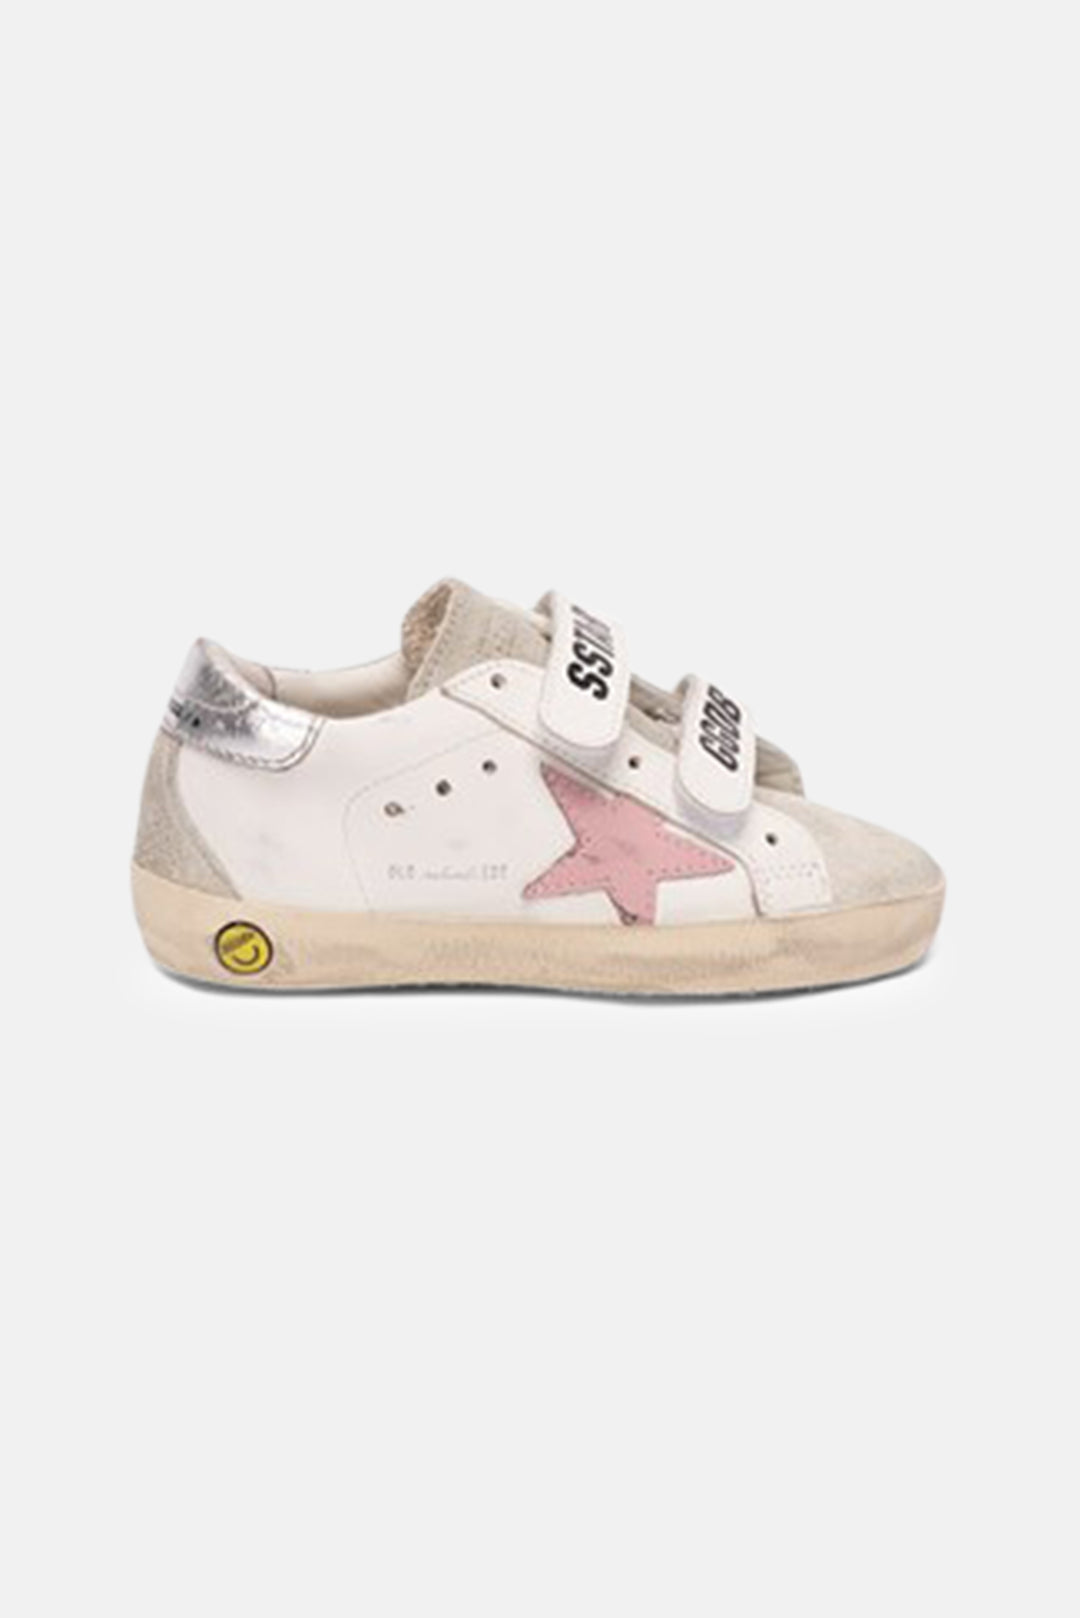 Toddler Old School Sneakers White/Orchid Pink